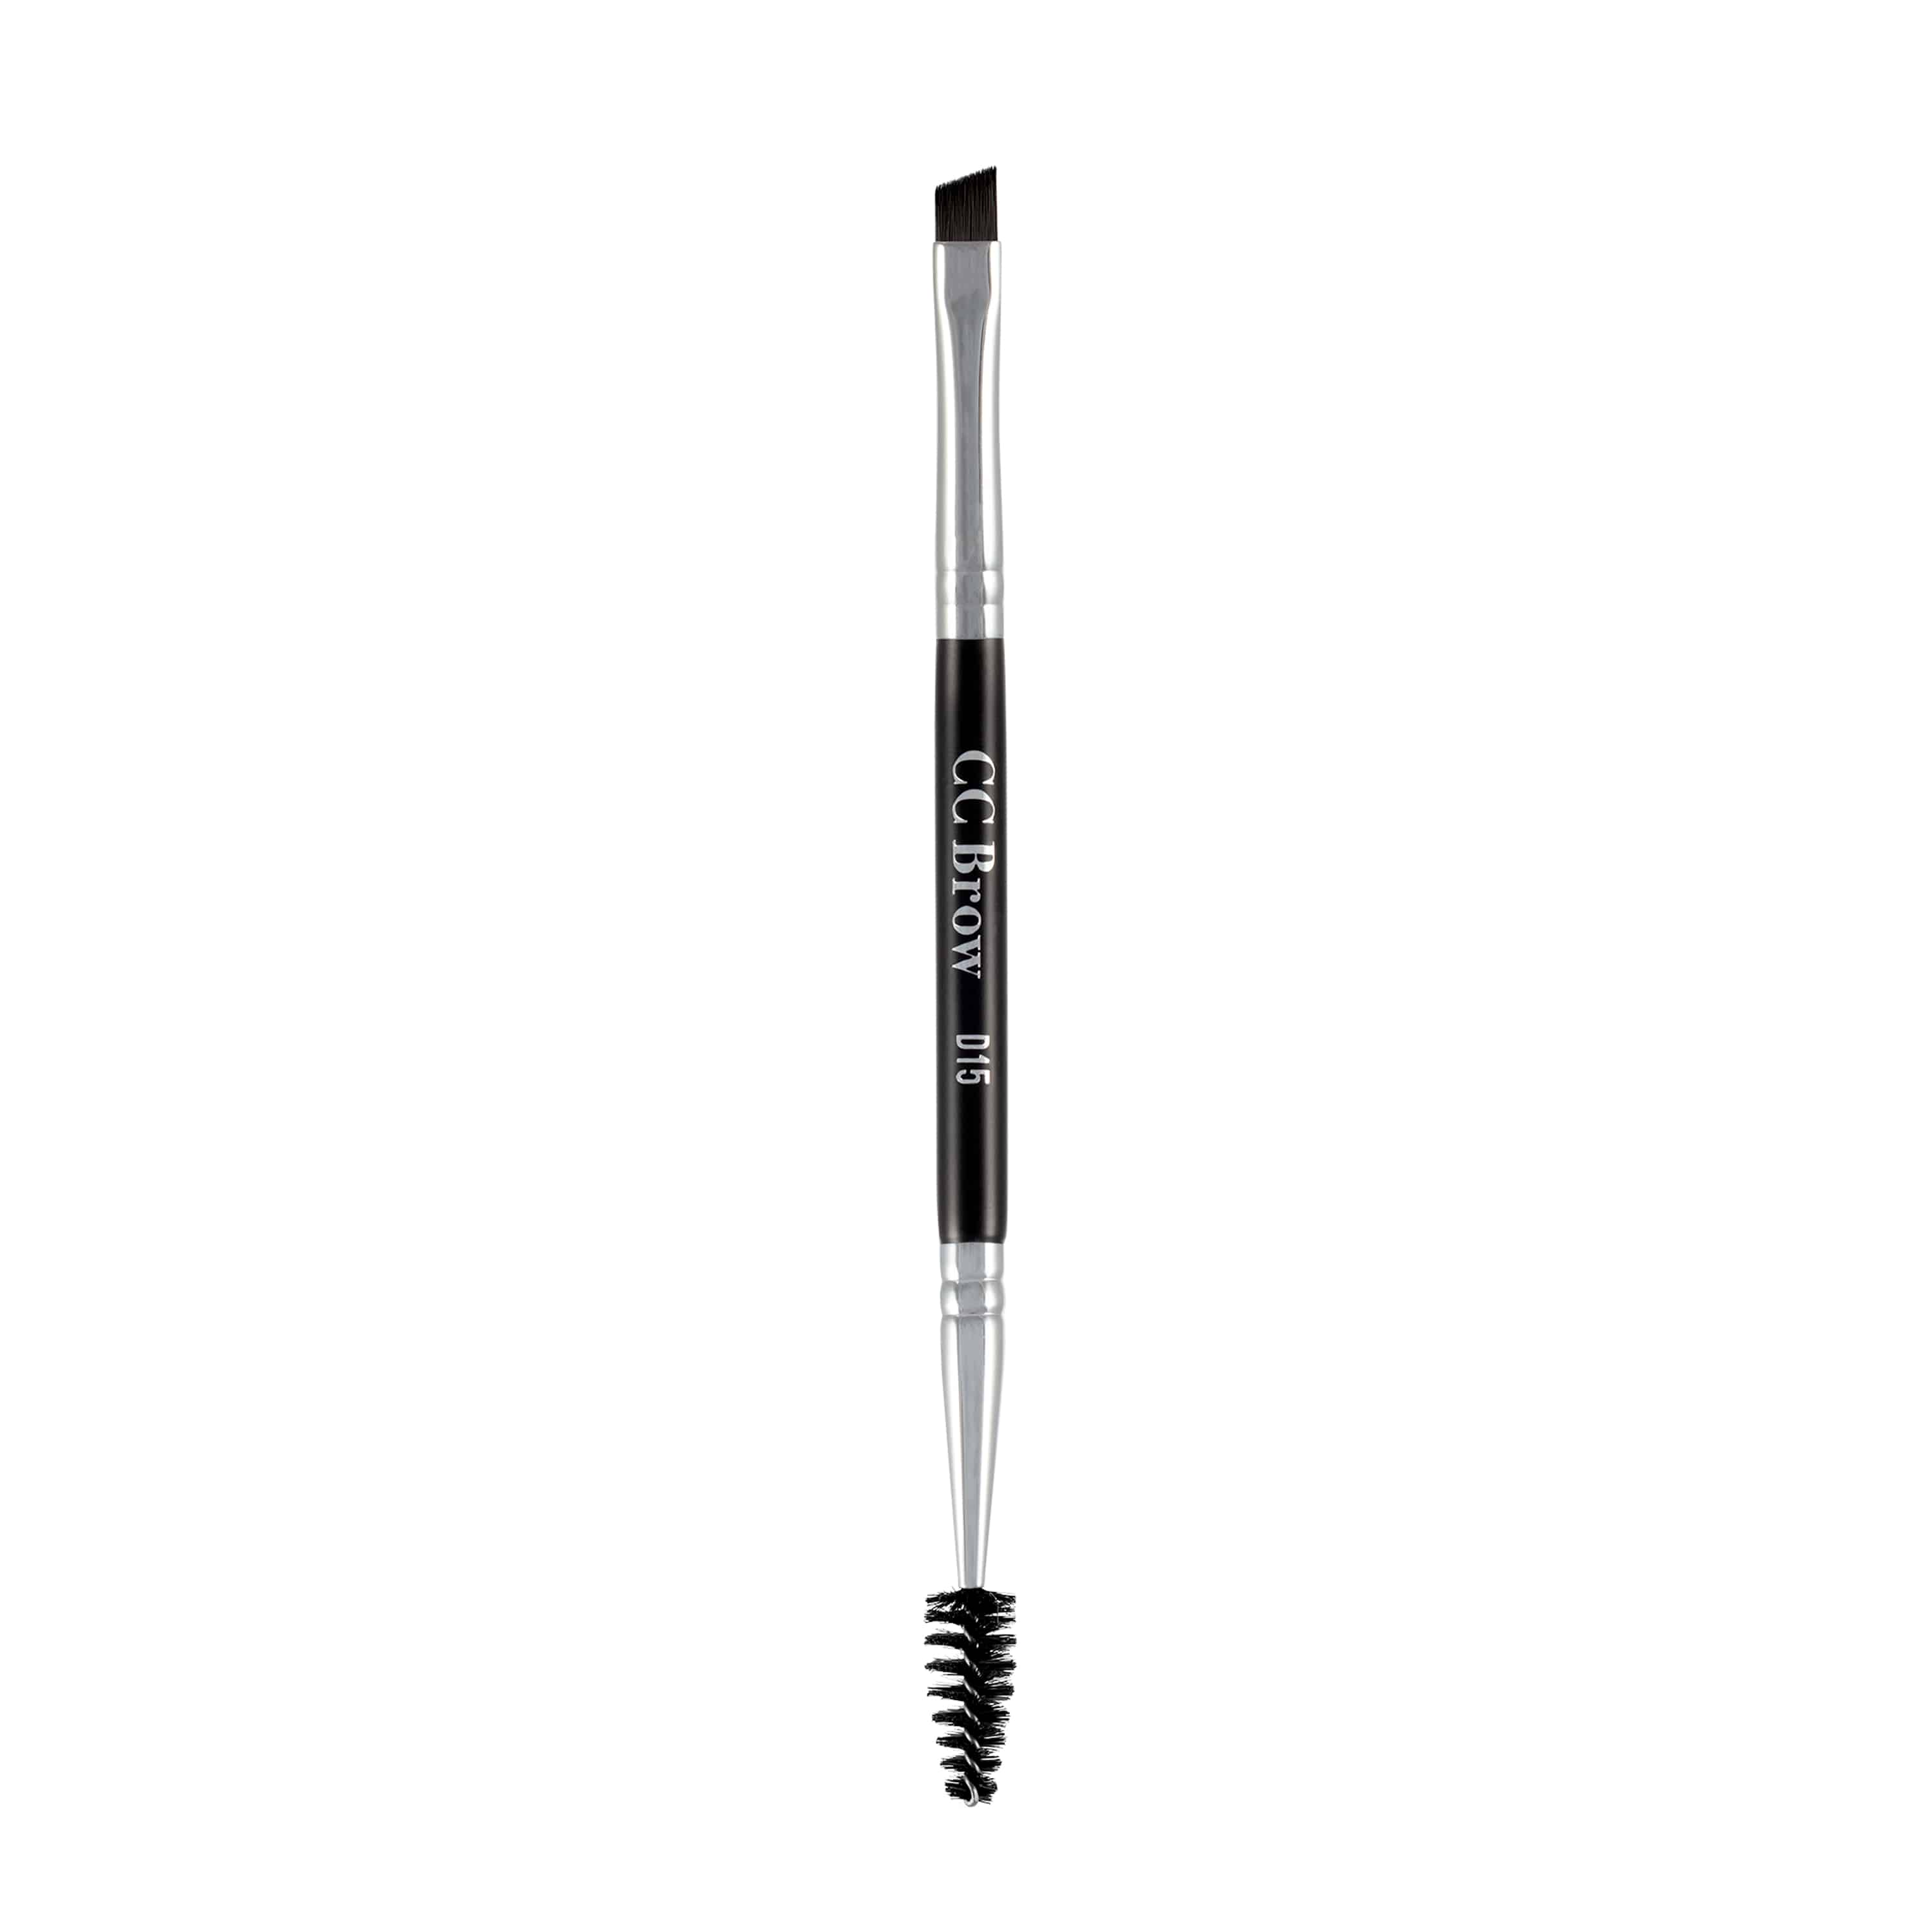 Double angled brush with mascara brush, D15 CC Brow